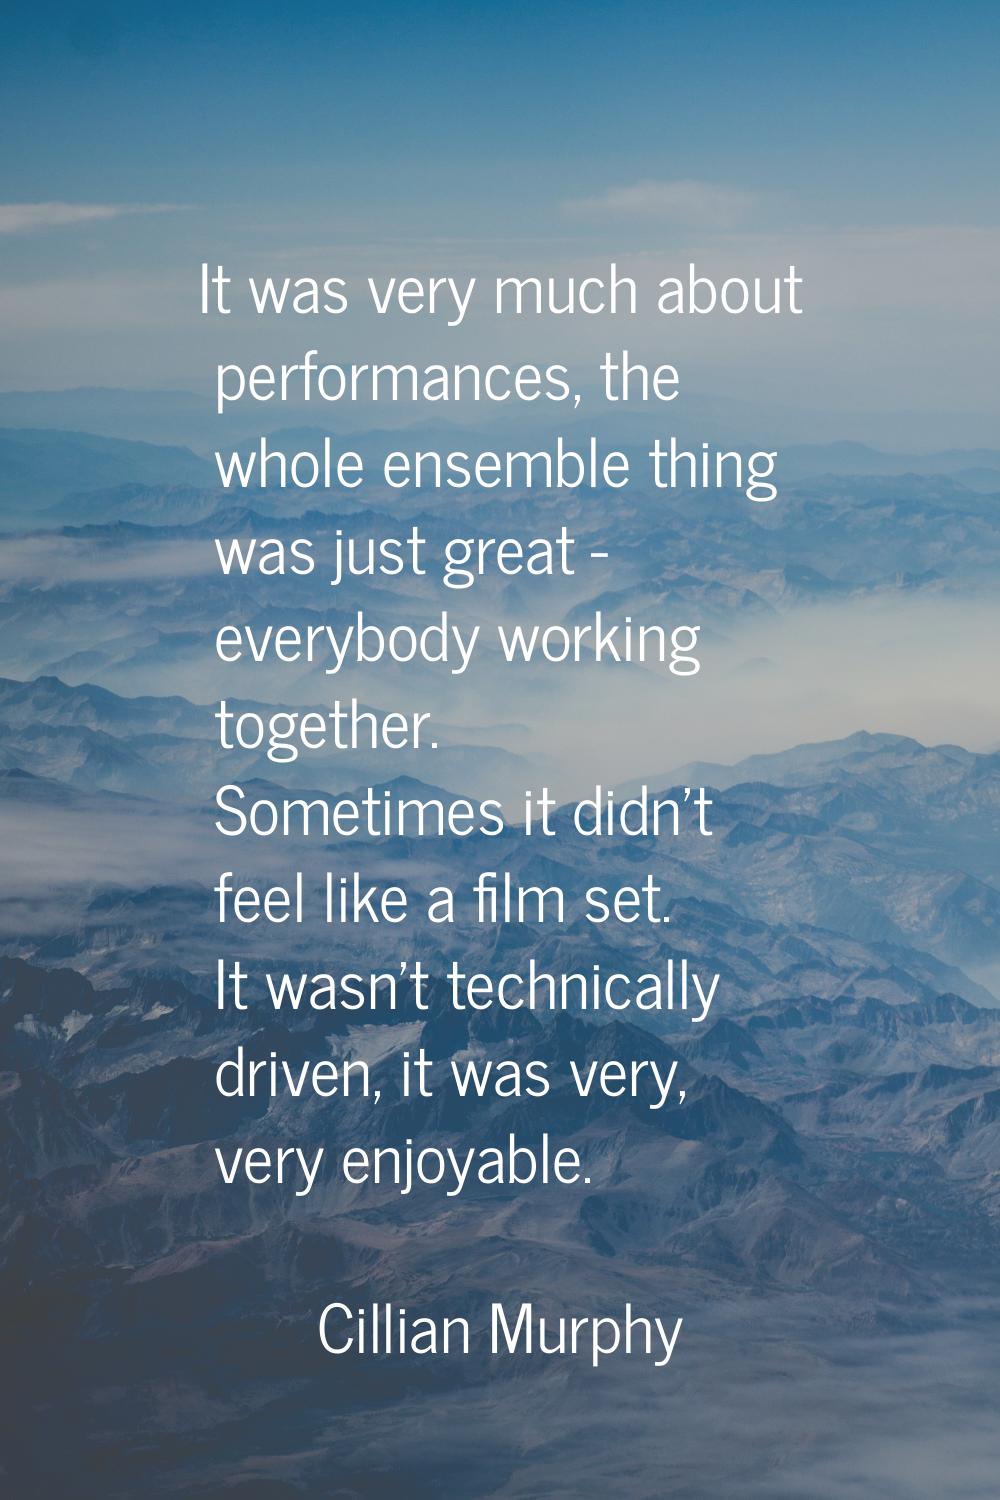 It was very much about performances, the whole ensemble thing was just great - everybody working to